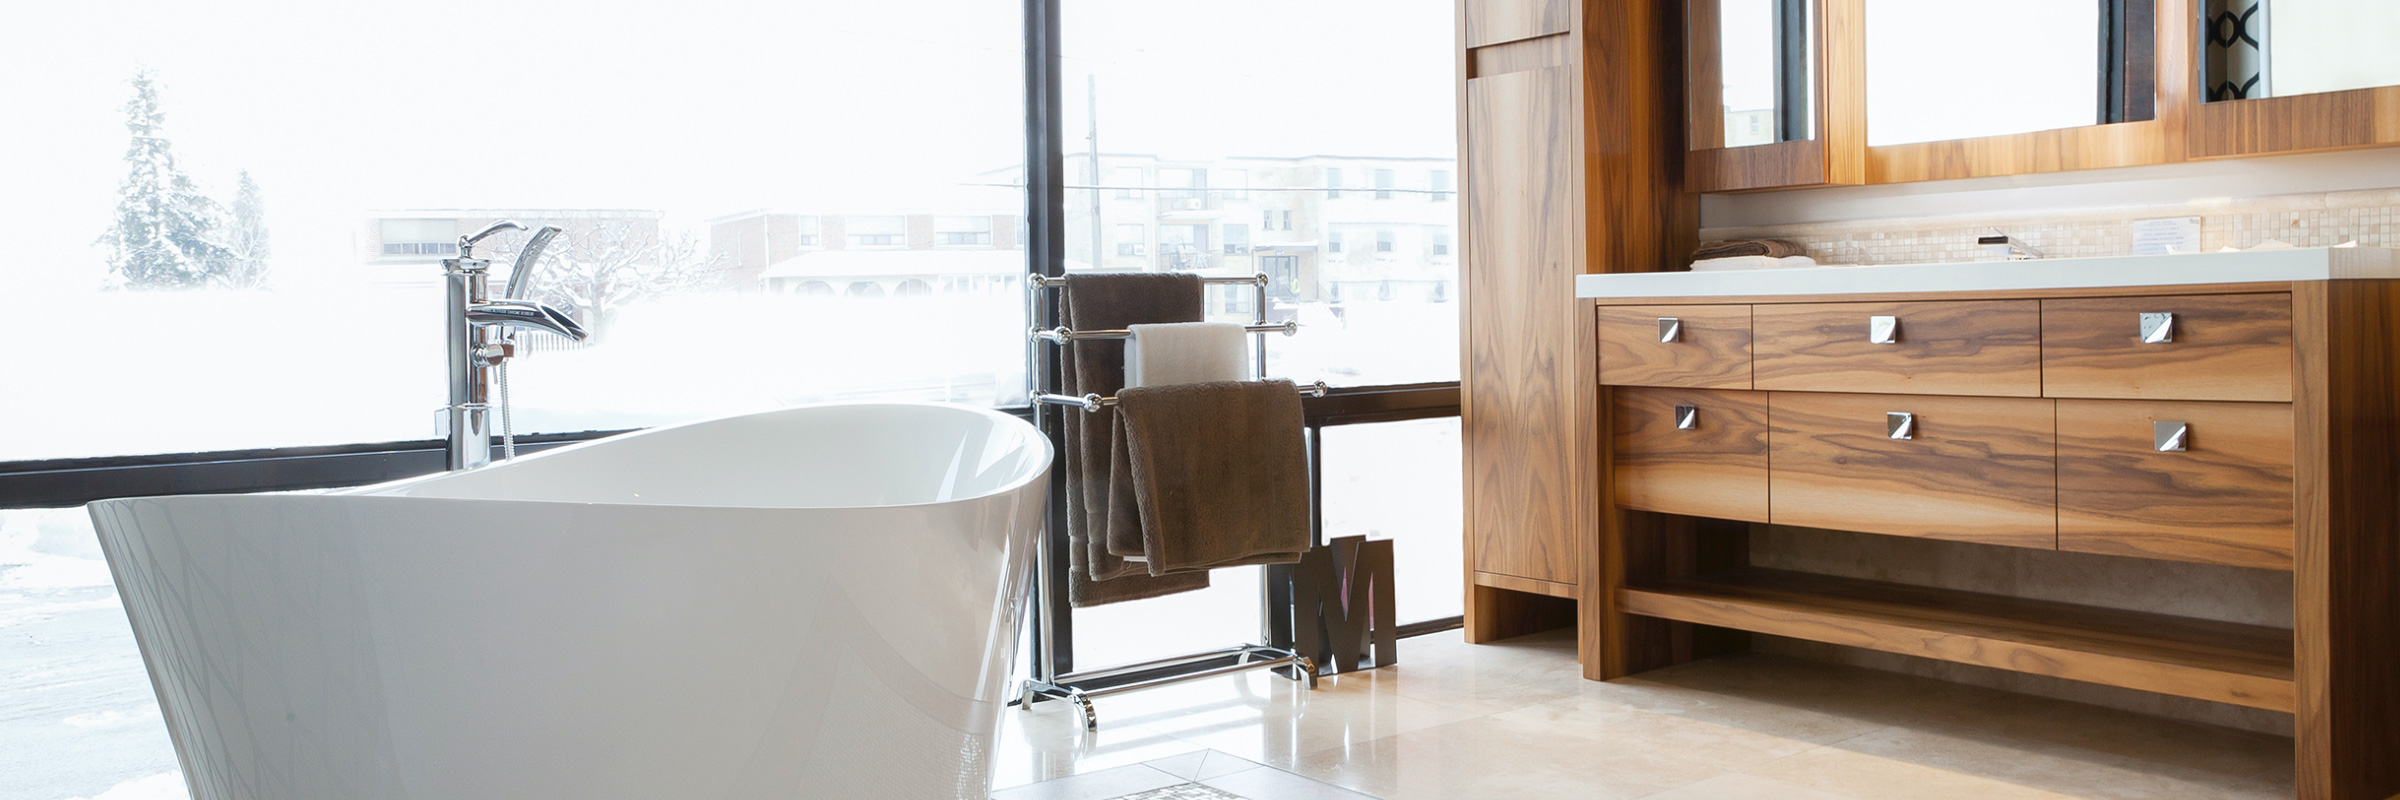 Bathroom samples in Kitchen and Bath Showrooms